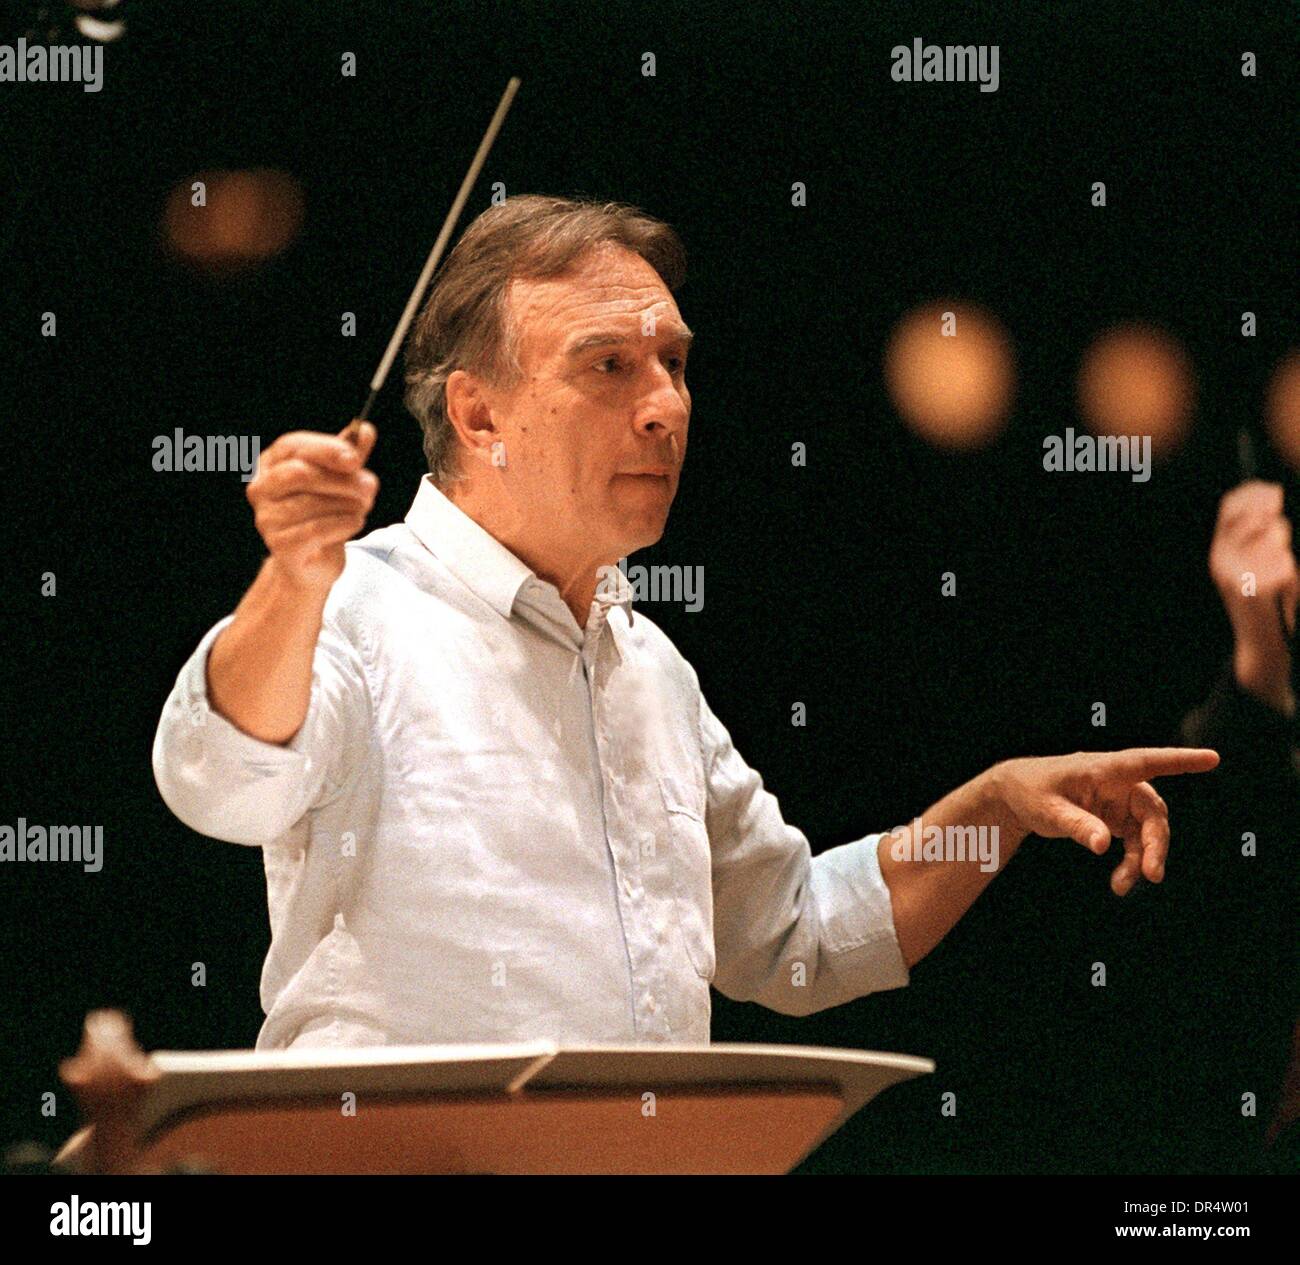 (dpa) - Italian conductor Claudio Abbado conducts the Berlin Philharmonic Orchestra during a rehearsal at the Beethoven festival hall in Bonn, Germany, 6 October 1999. Abbado studied piano at the Milan Conservatory with his father Michelangelo Abbado and later went on to study conducting with Hans Swarowsky at the Vienna Academy of Music. He won the 1958 Koussevitsky Competition, establishing him in Italy, and then won the 1963 Mitropoulos Prize, after which he rapidly became known internationally as an orchestral and opera conductor. Abbado first conducted the Berlin Philharmonic in 1966, and Stock Photo